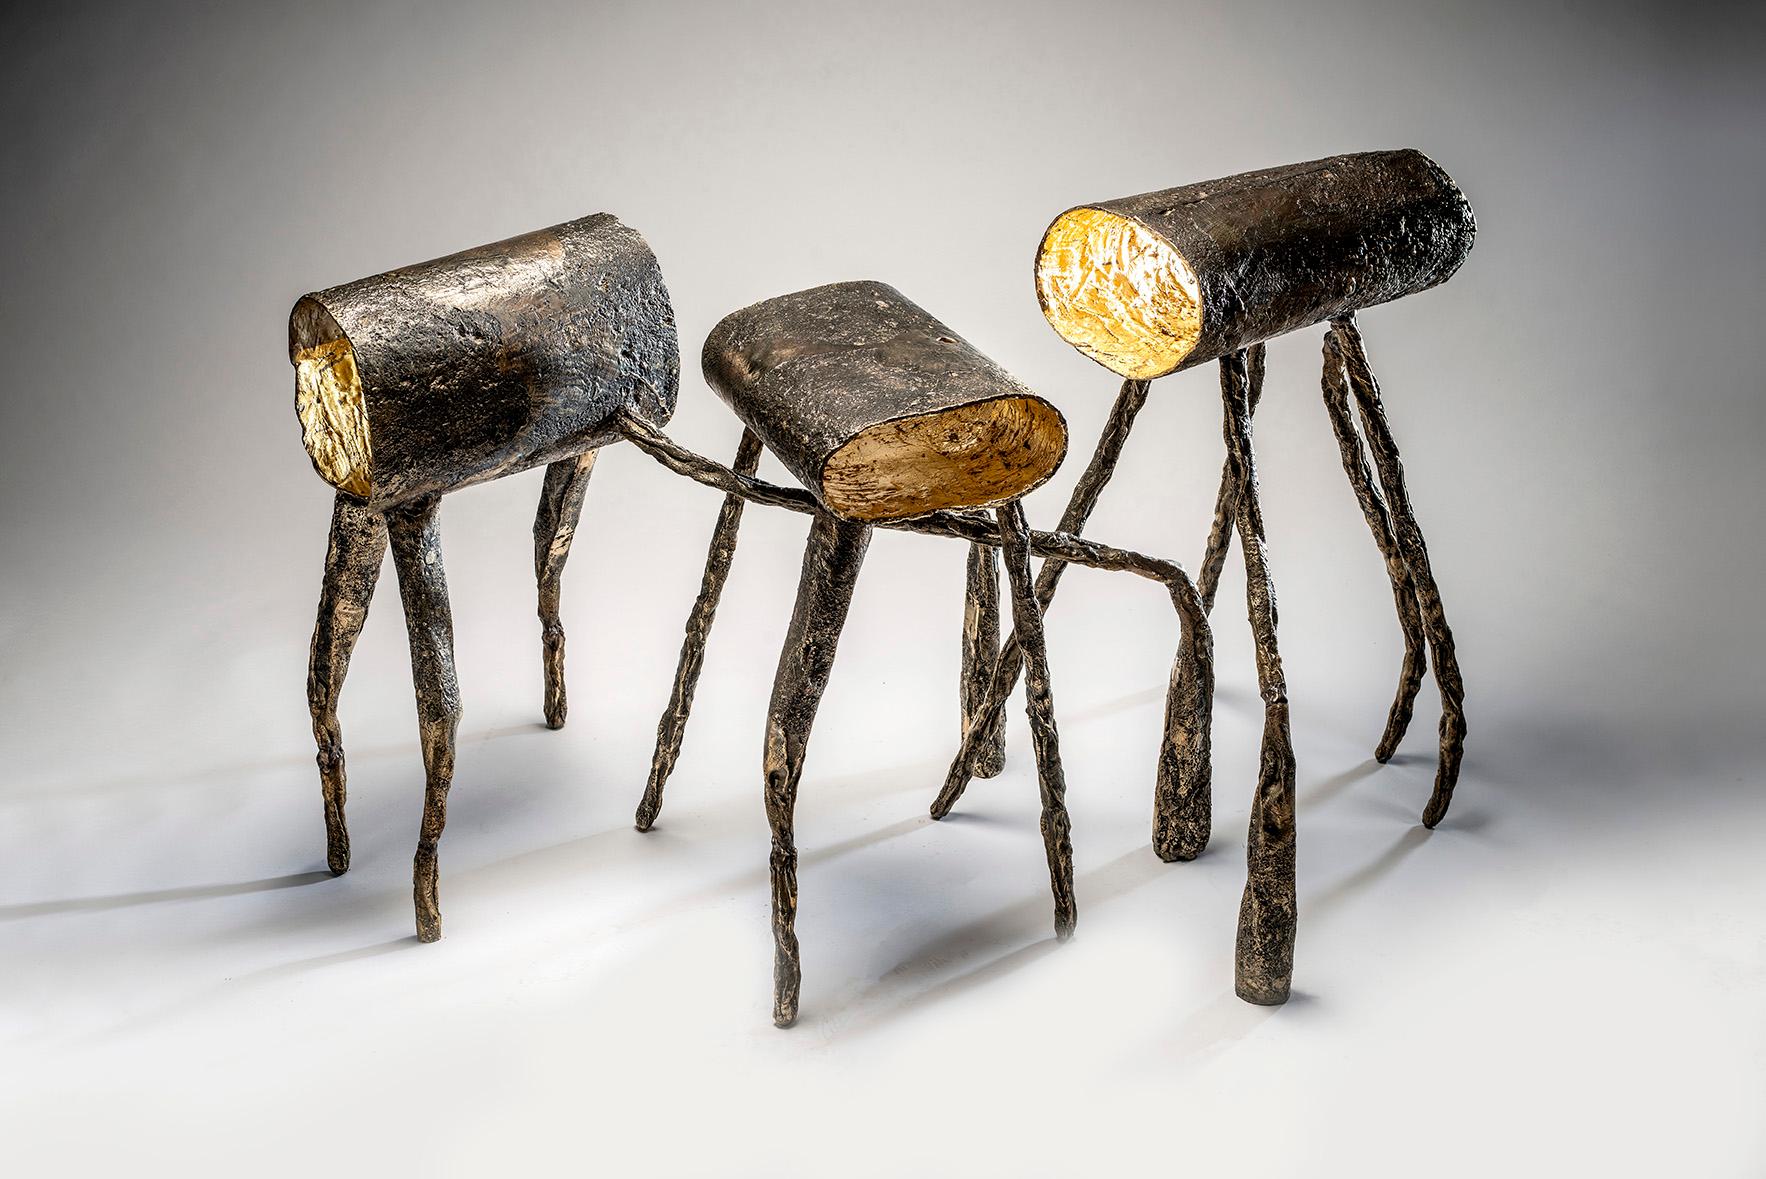 Never less alone than when alone stools, 2019
Cast bronze and gold leaf low polish
Measures: Left stool: 26.5 x 32 x 24 in
Center stool: 24.5 x 16 x 16 in
Right stool: 29 x 21 x 21 in.